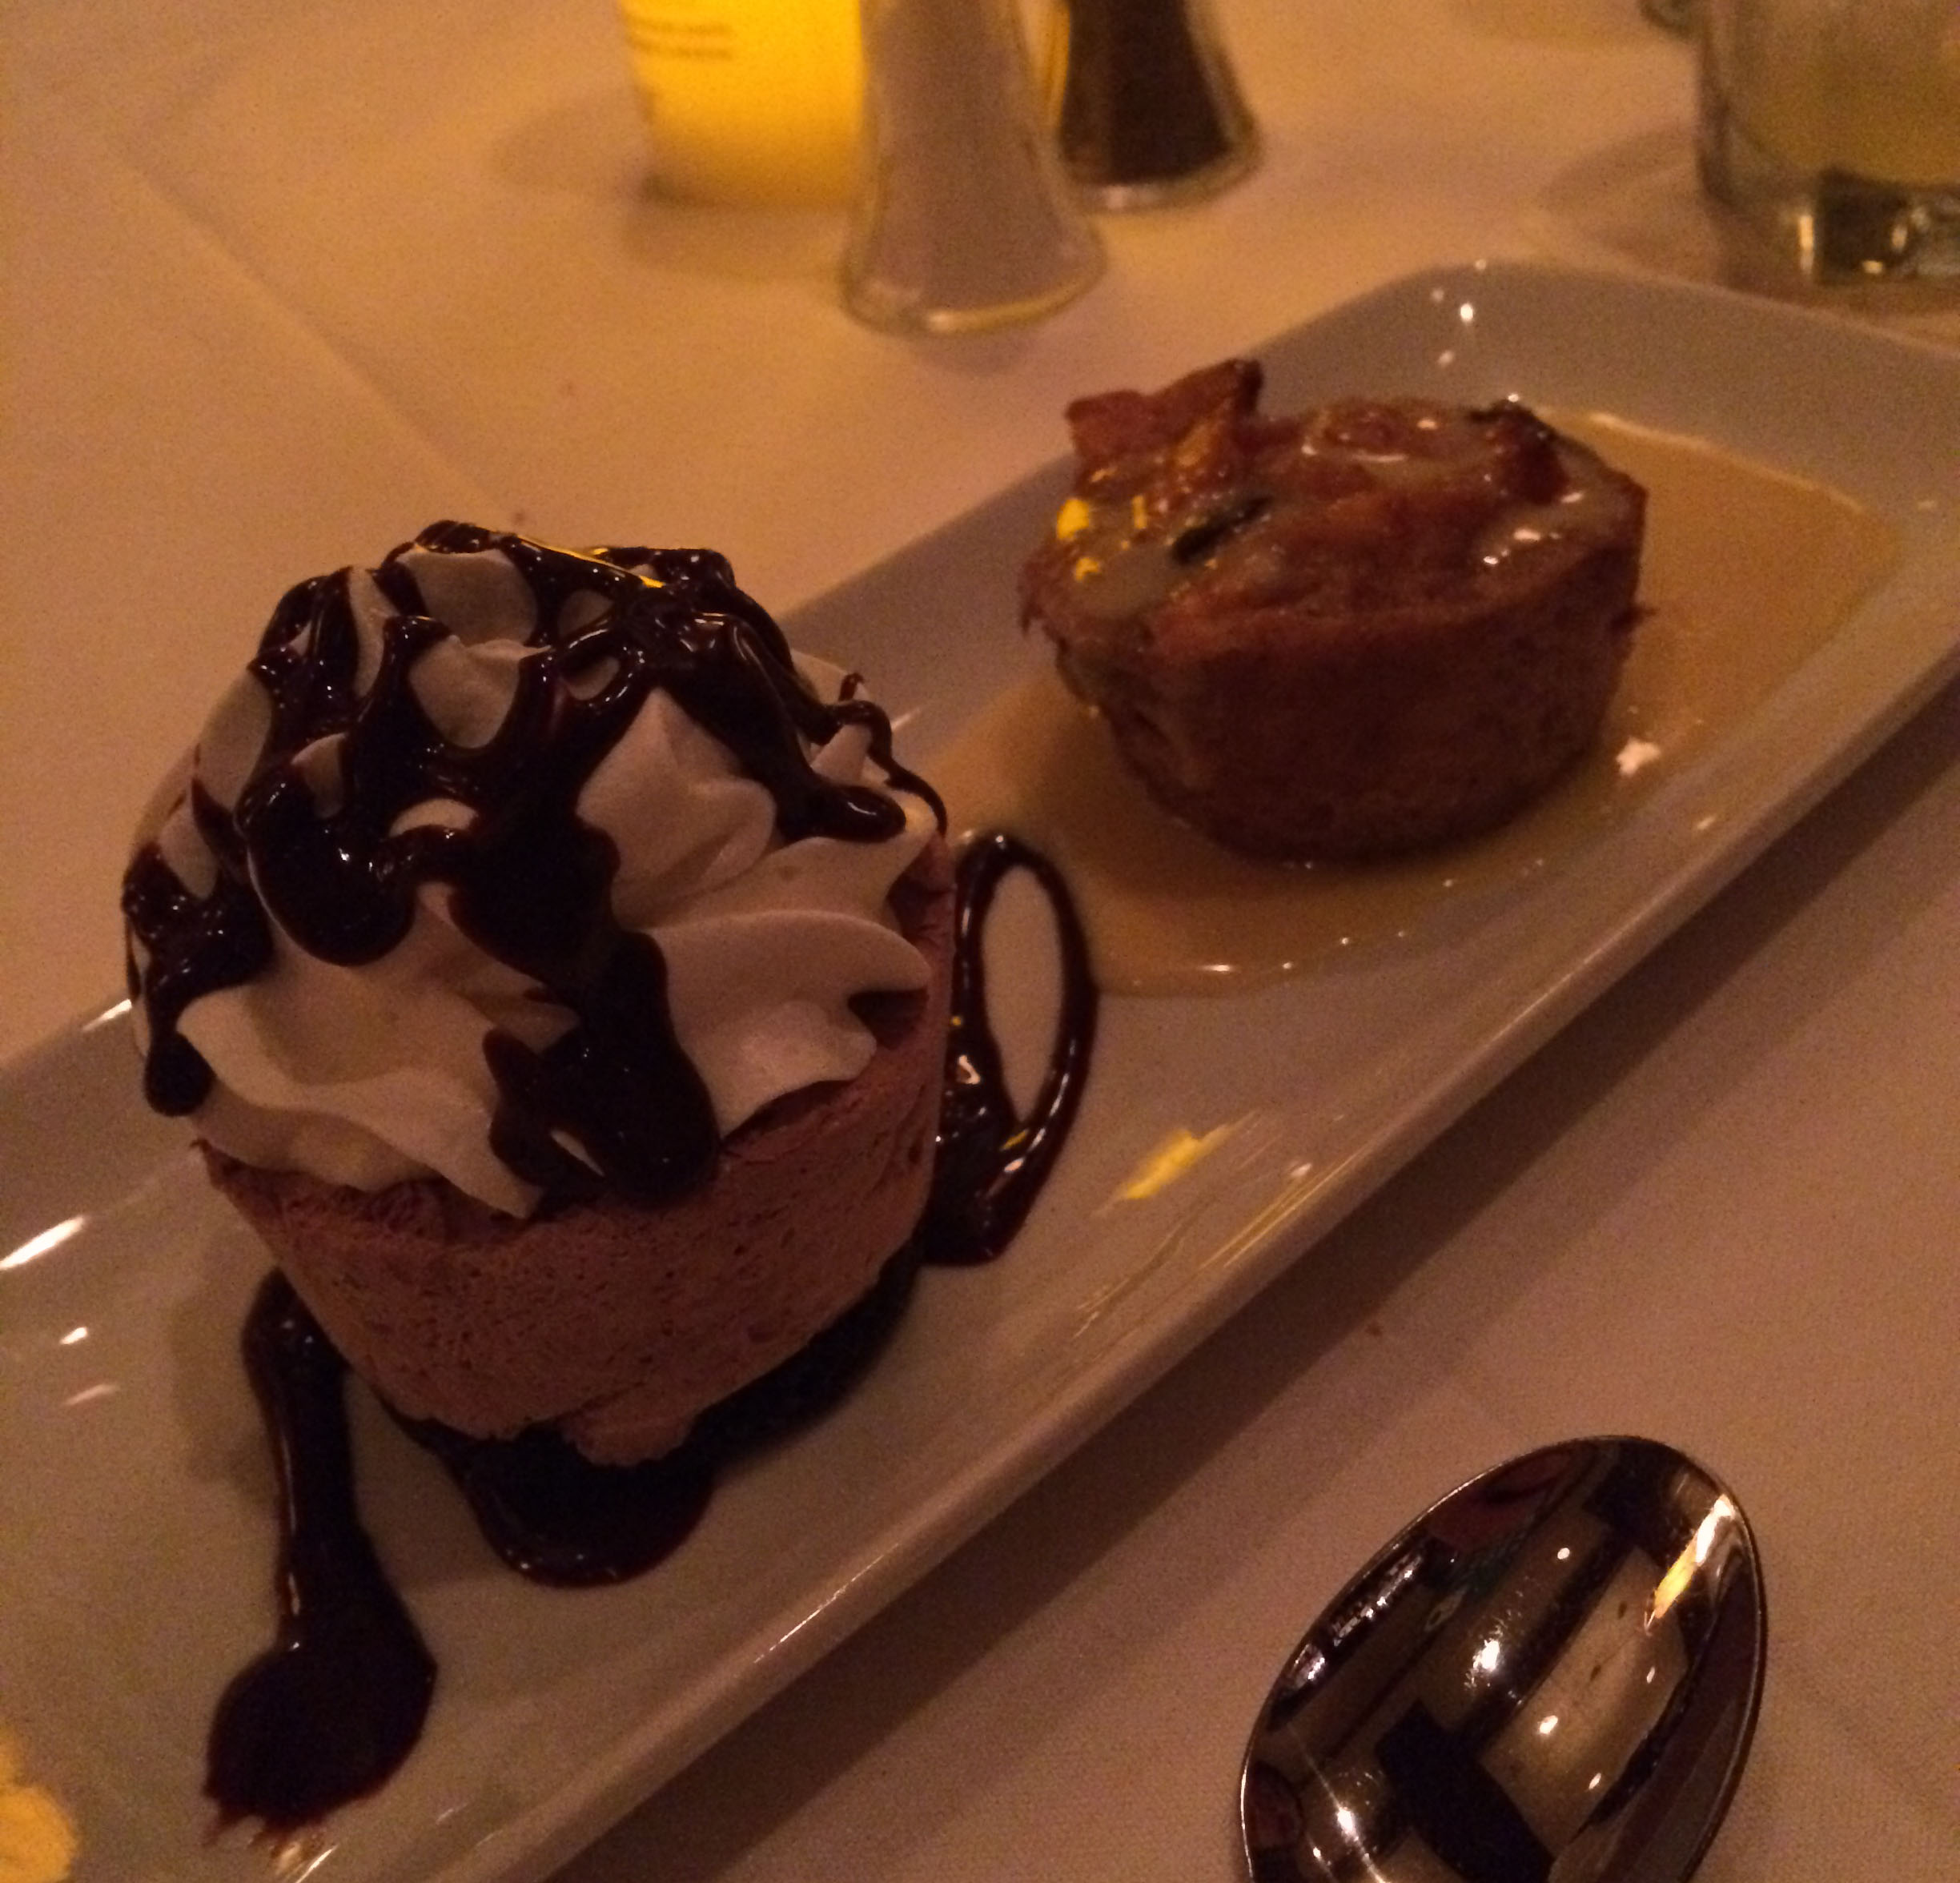 Even though I was crazy full, the dessert was my favorite part of the meal.